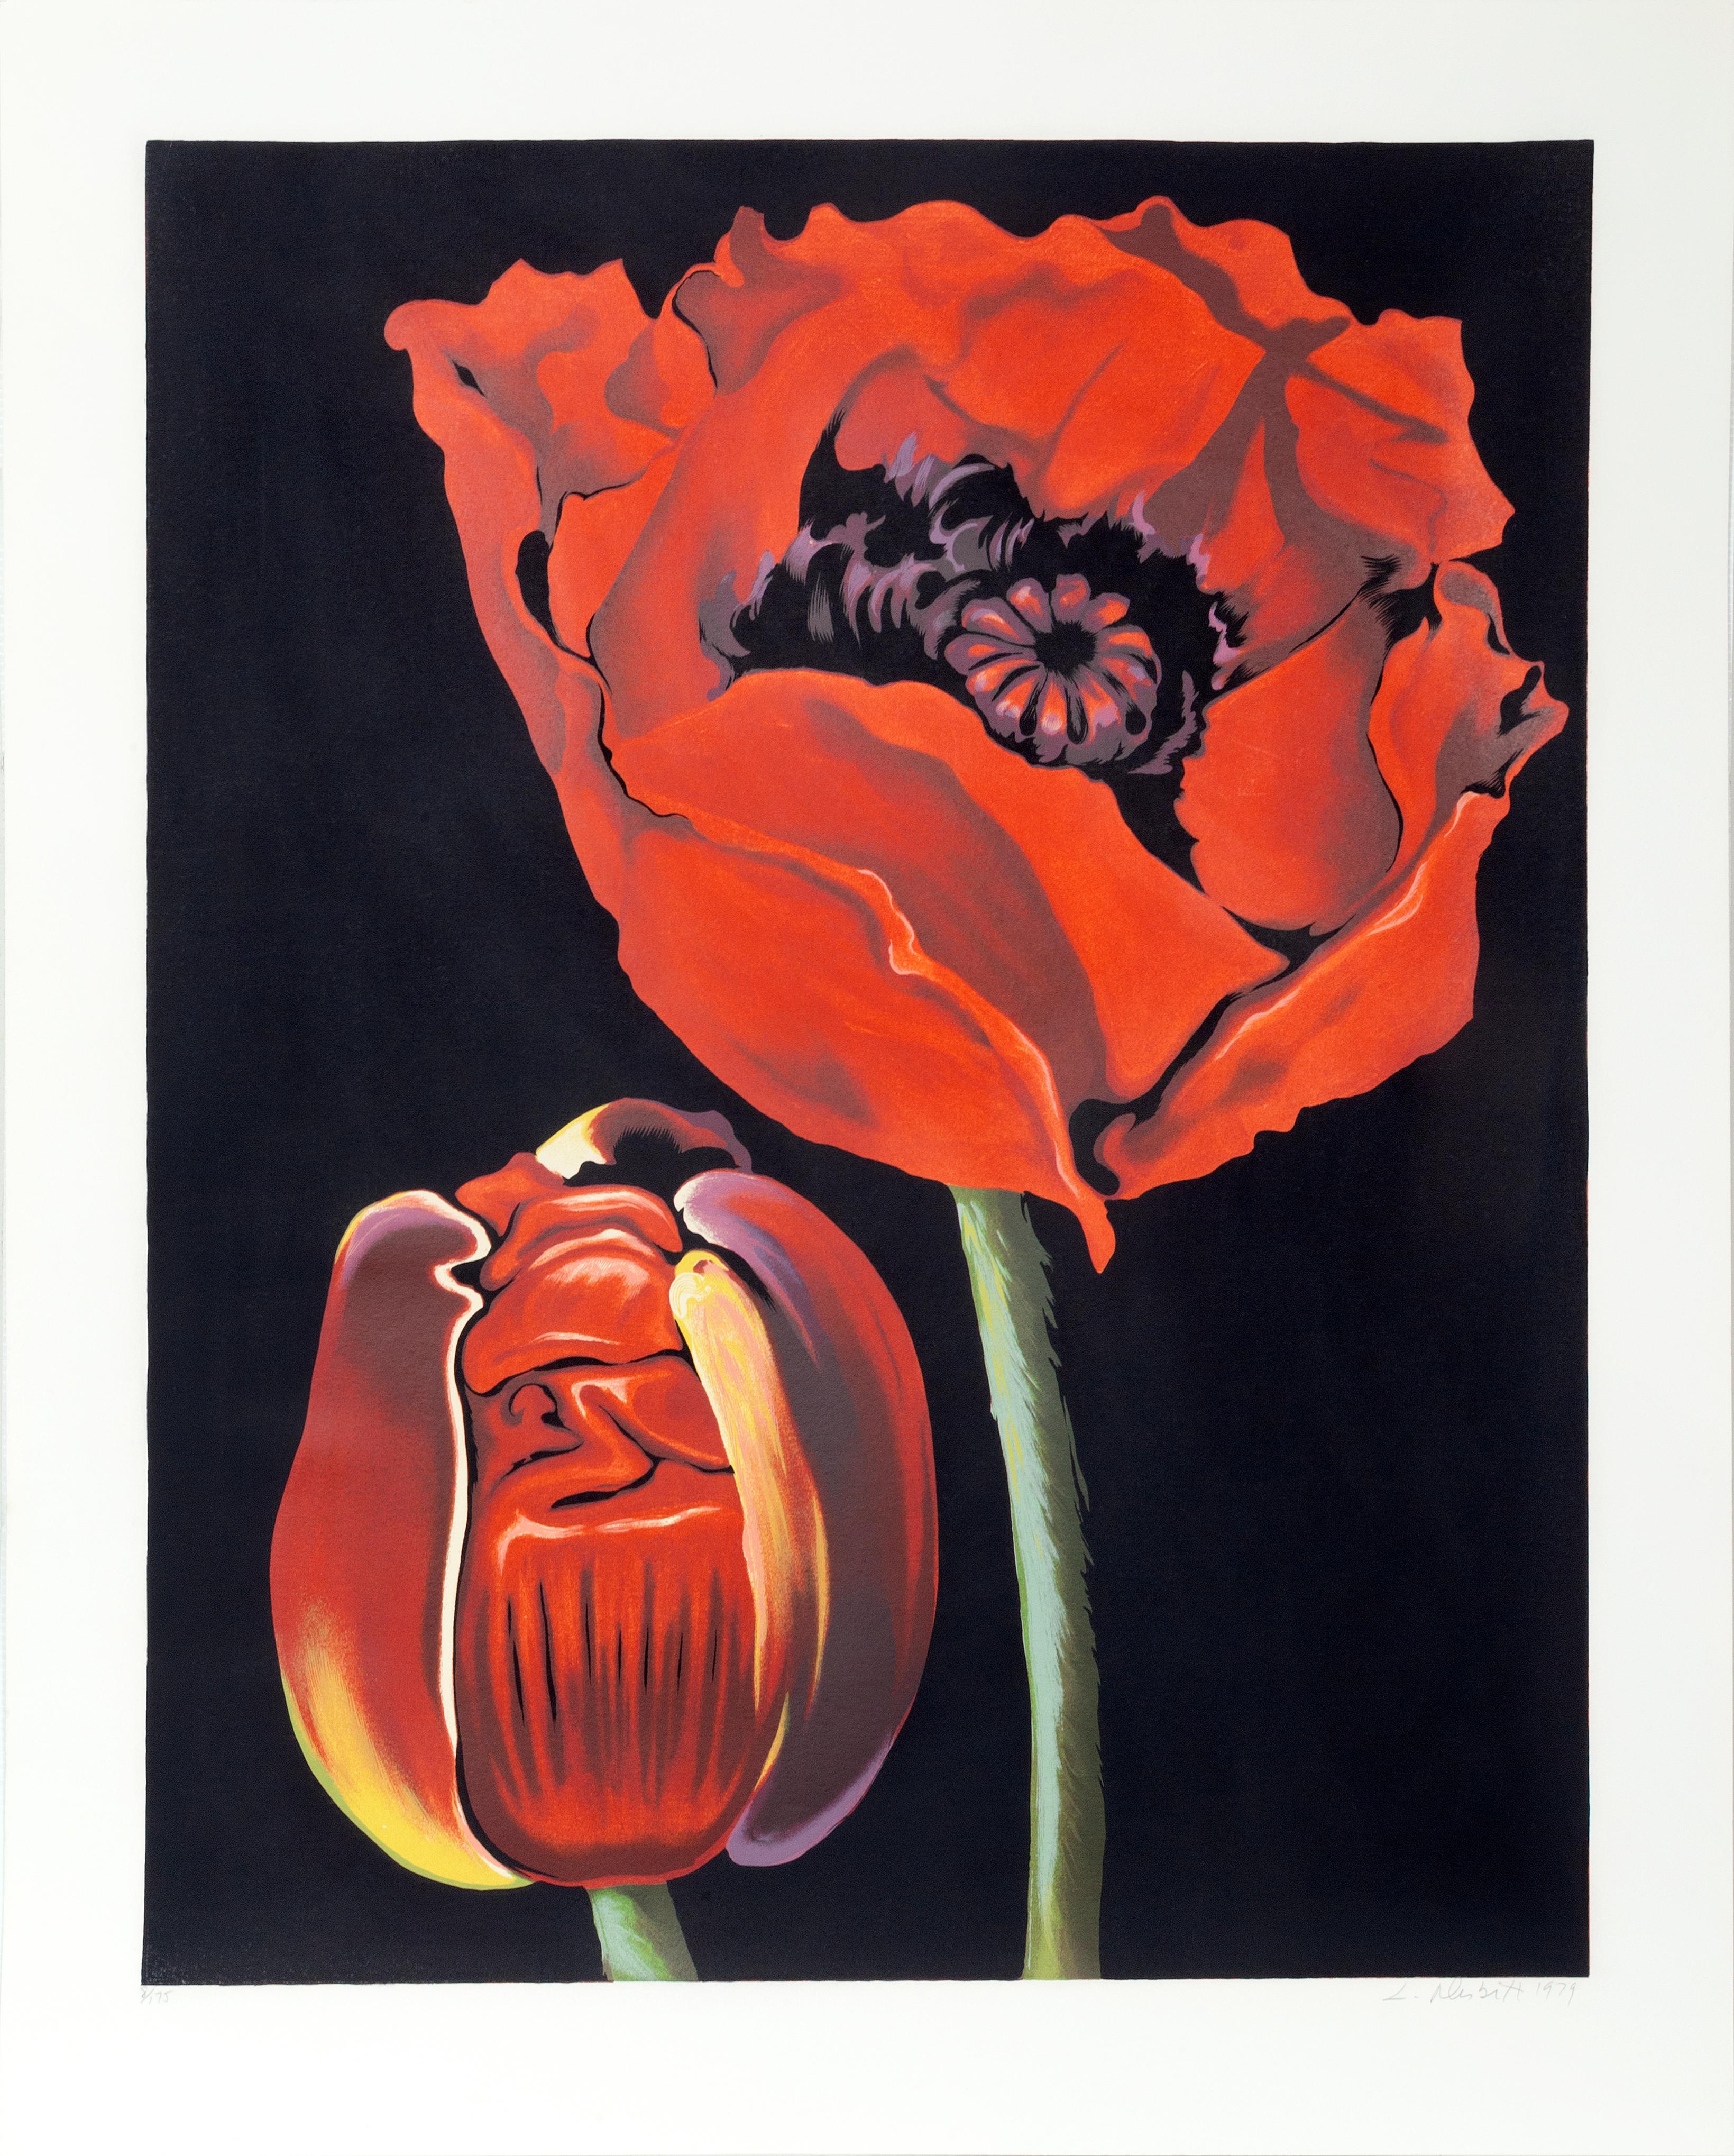 Artist: Lowell Nesbitt, American (1933 - 1993)
Title: Red Poppies
Year: 1979
Medium: Serigraph, signed and numbered in pencil
Edition: 175
Paper Size: 44.5 x 35.5 inches